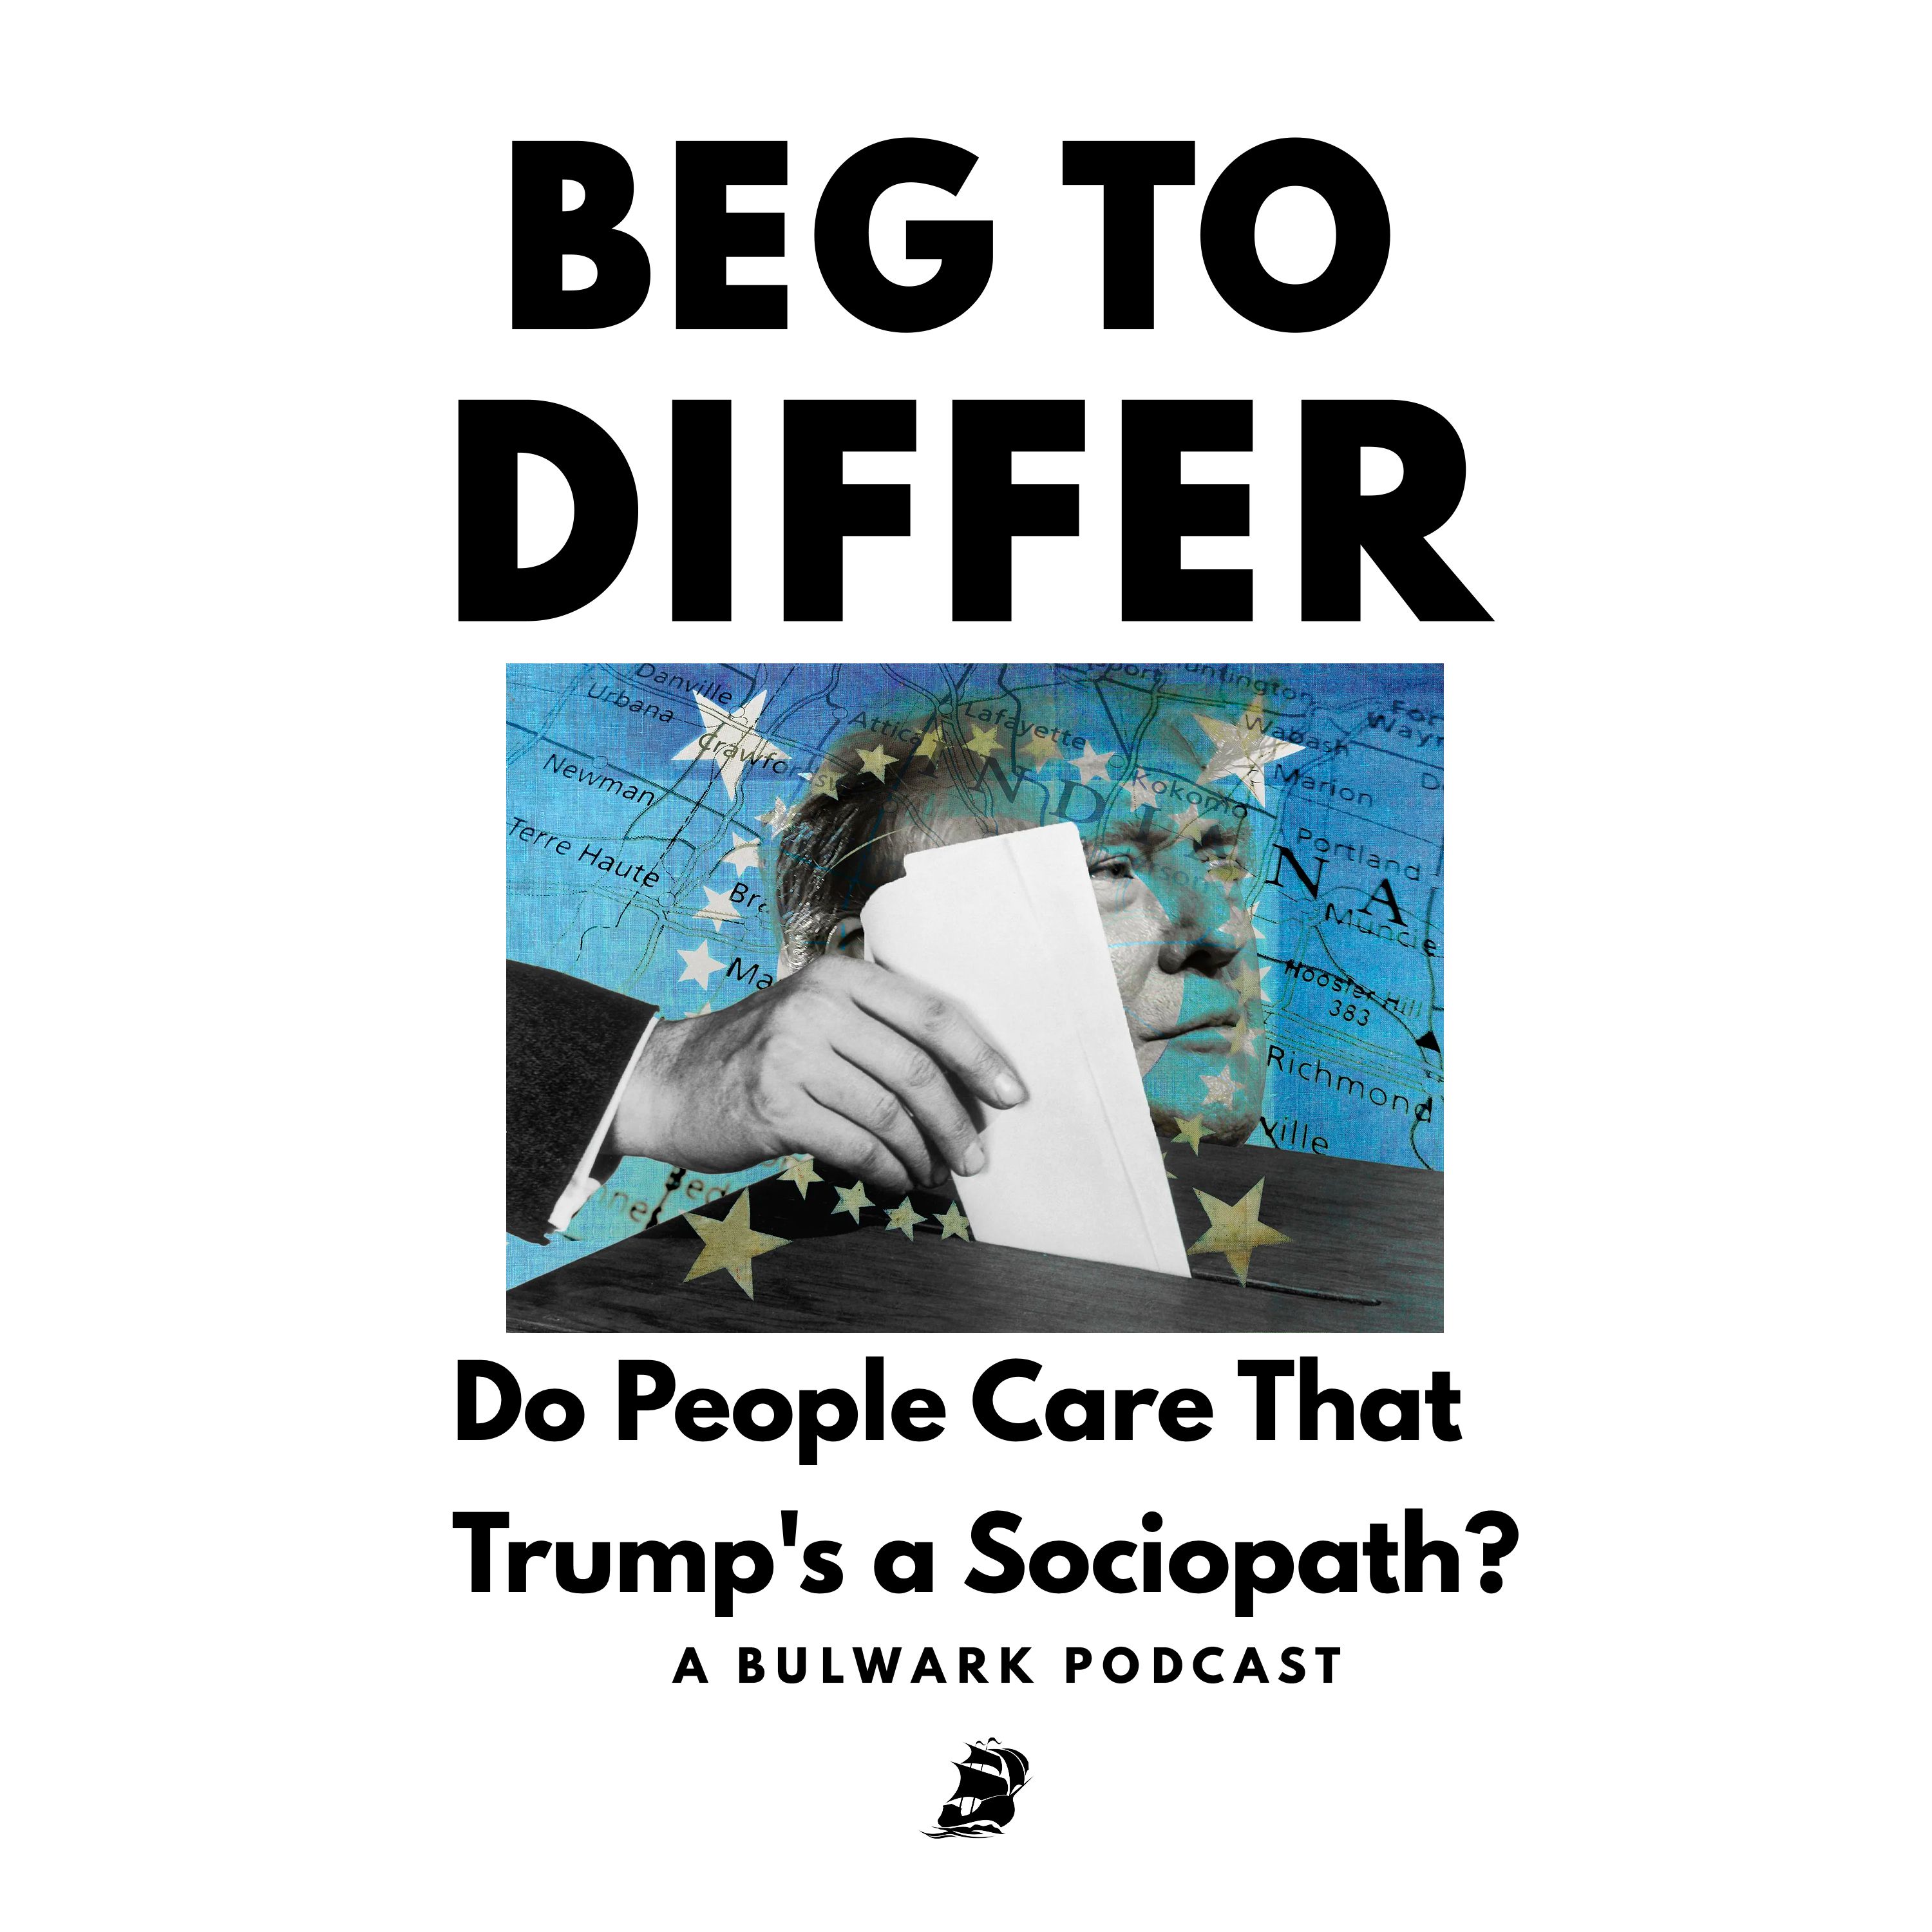 Do People Care That Trump's a Sociopath?